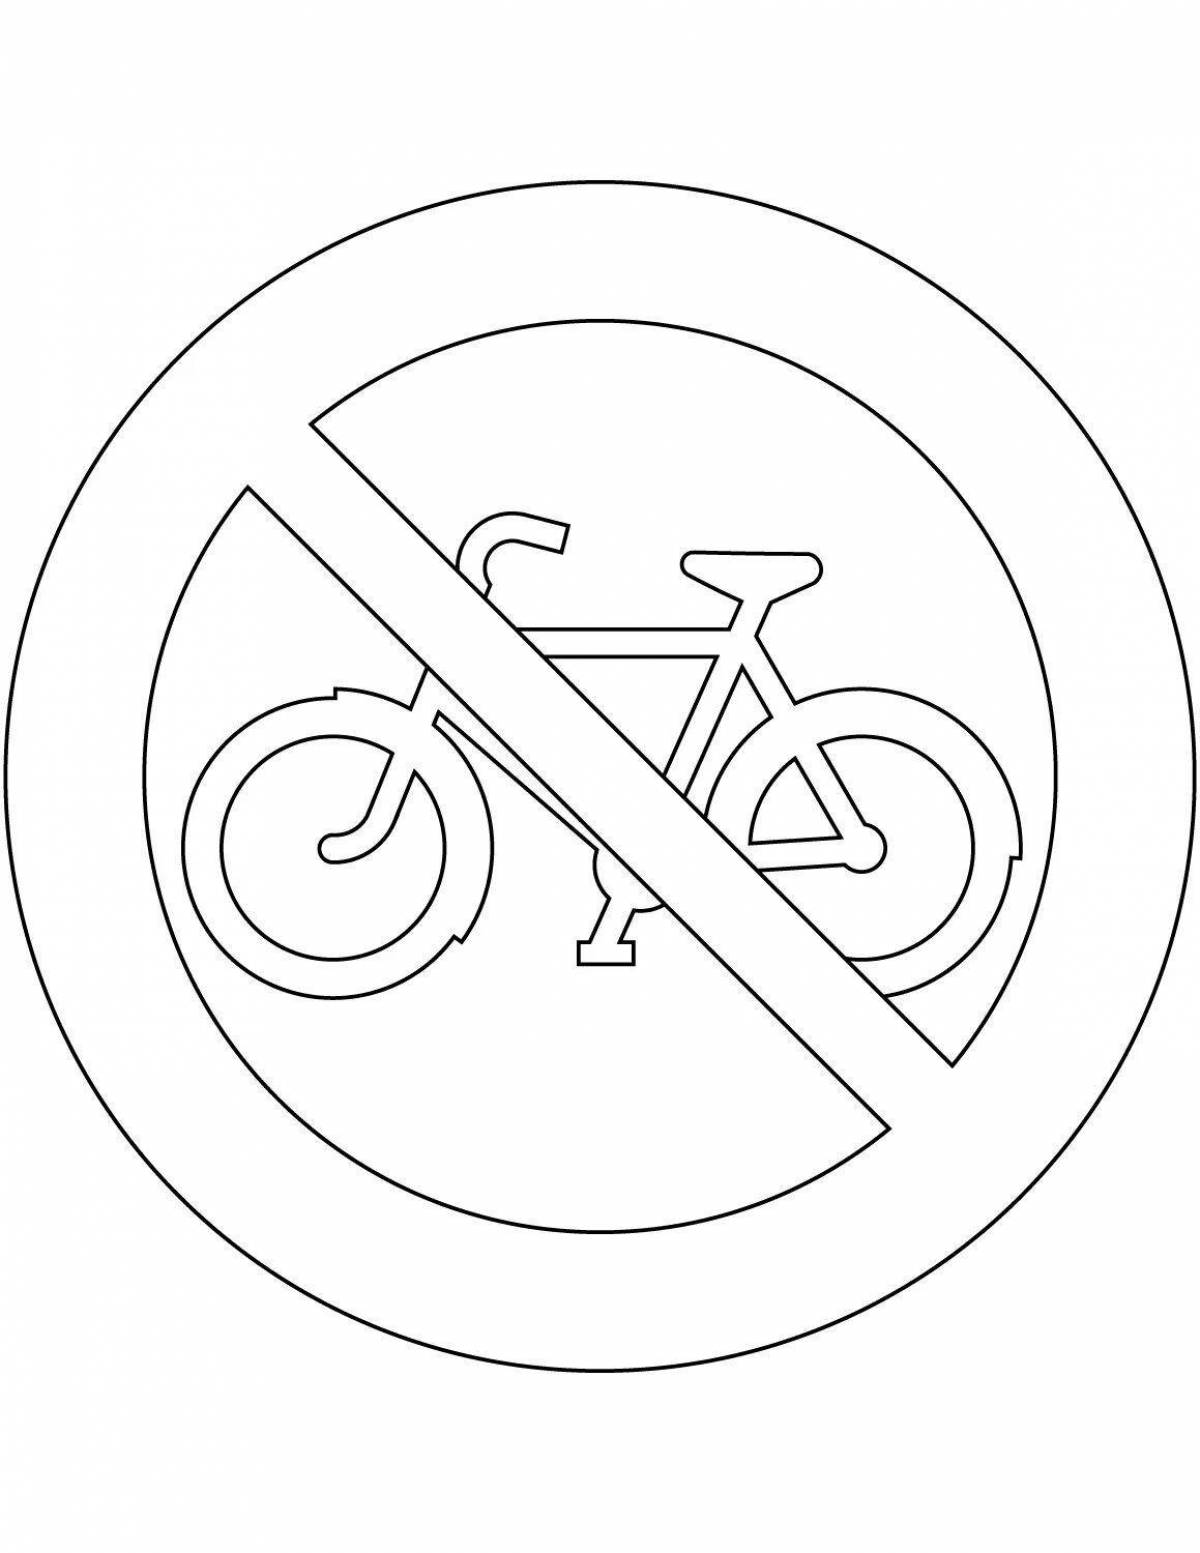 Colourful bike path coloring page